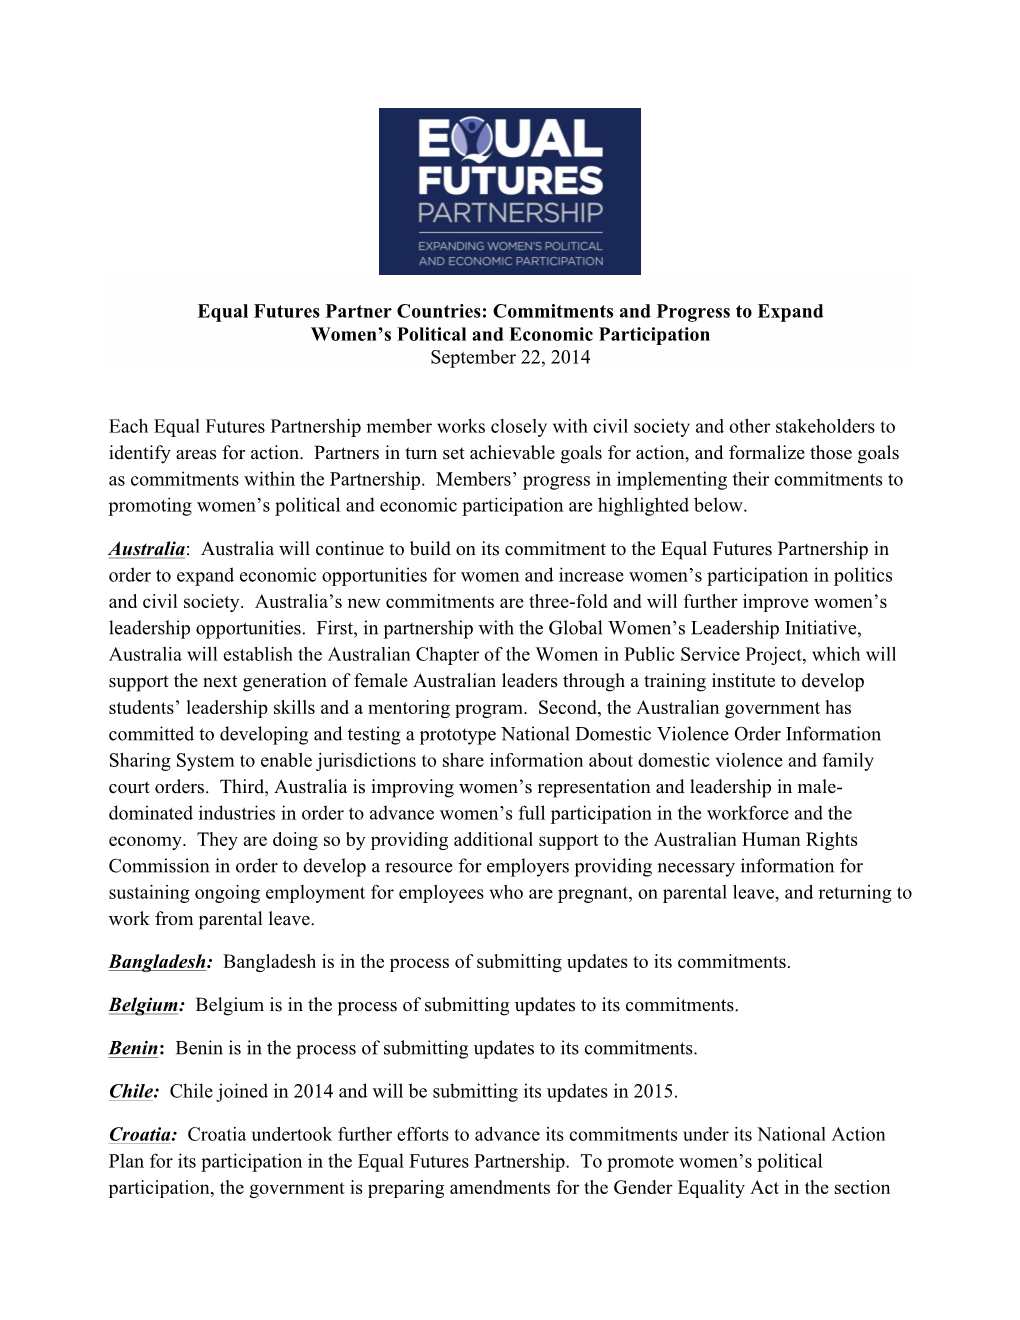 Equal Futures Partner Countries: Commitments and Progress to Expand Women’S Political and Economic Participation September 22, 2014